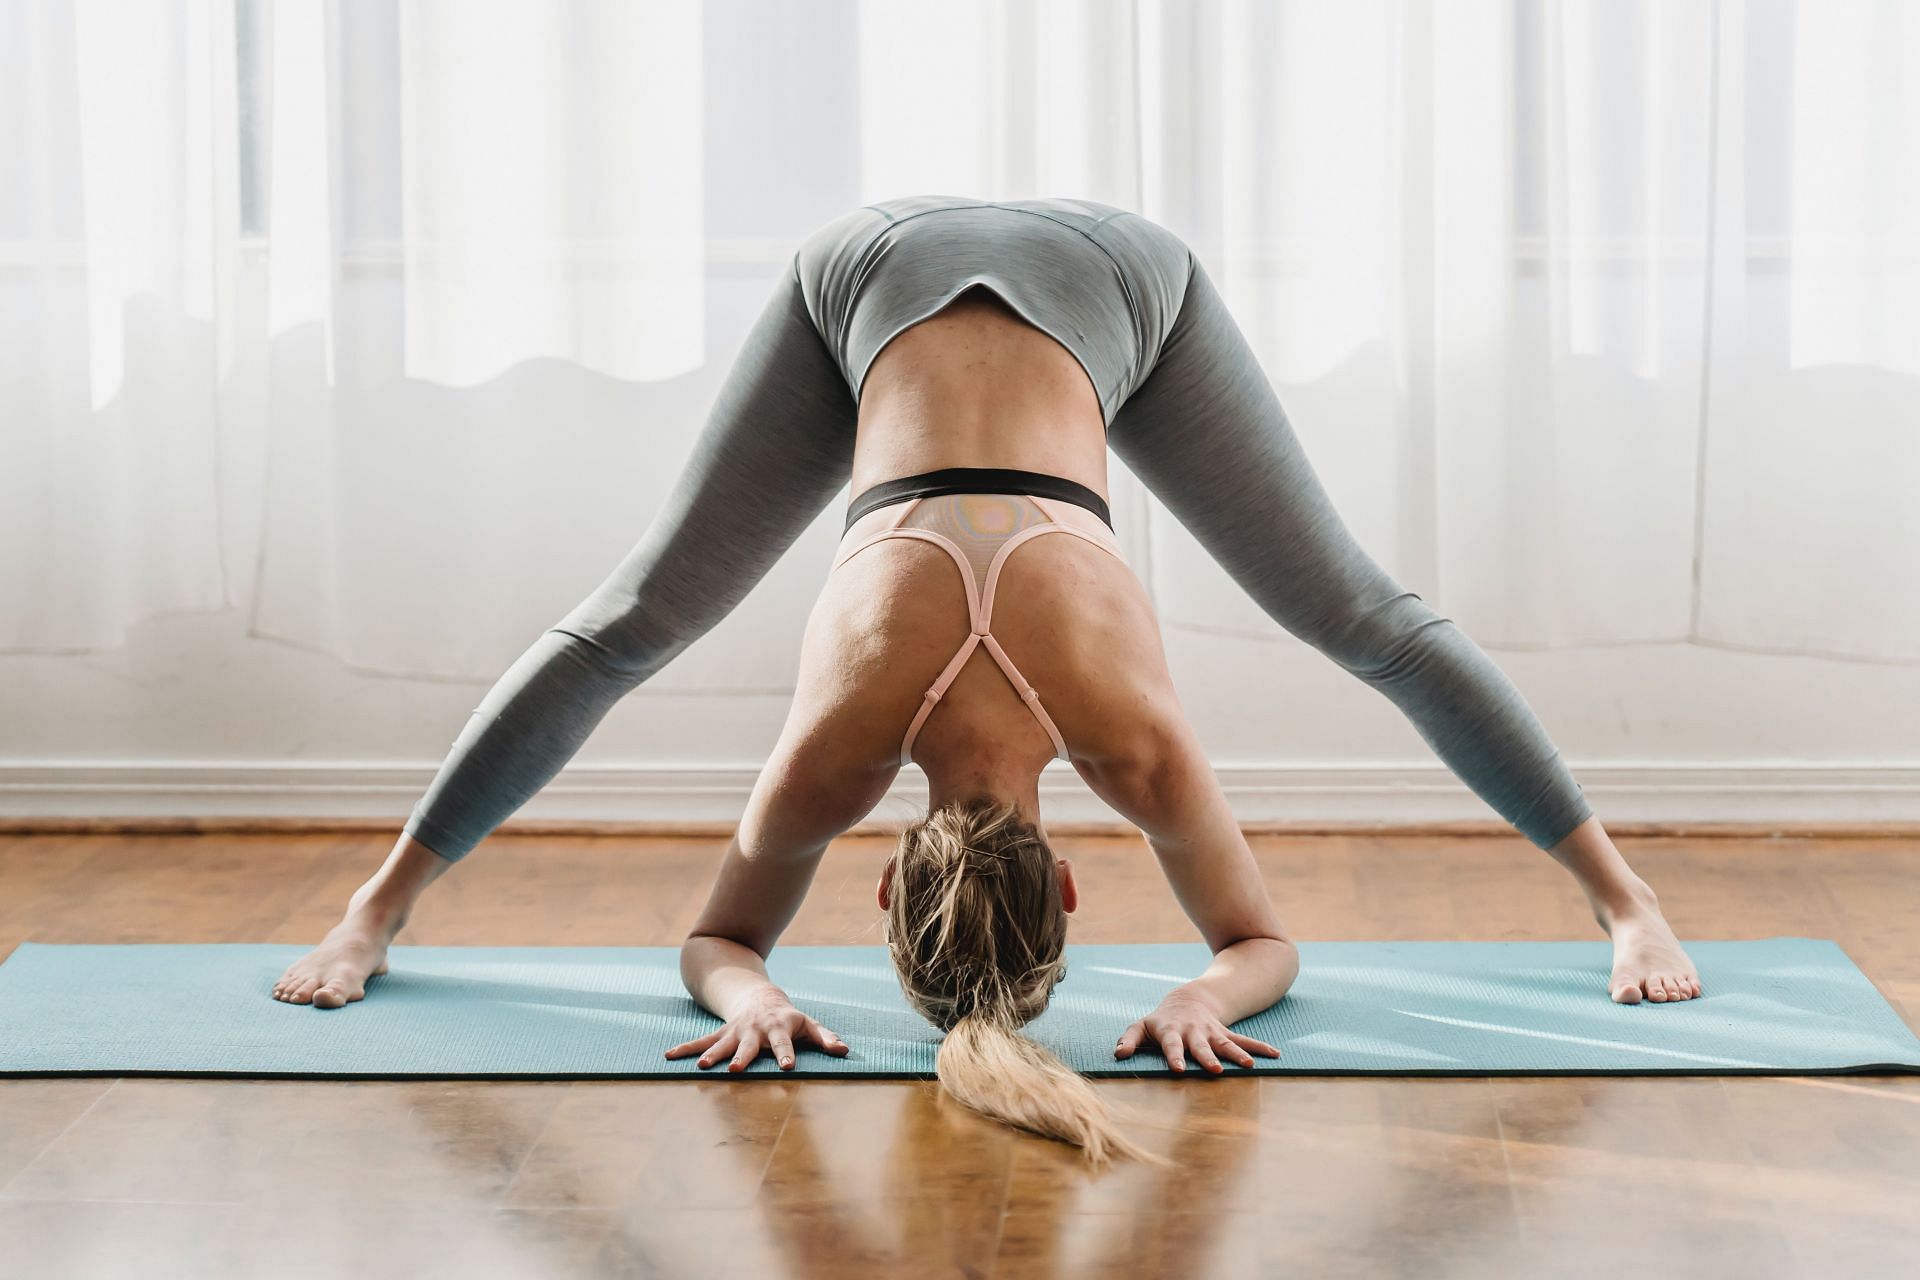 How To Build Muscle With Yoga: 8 Poses To Build Strength